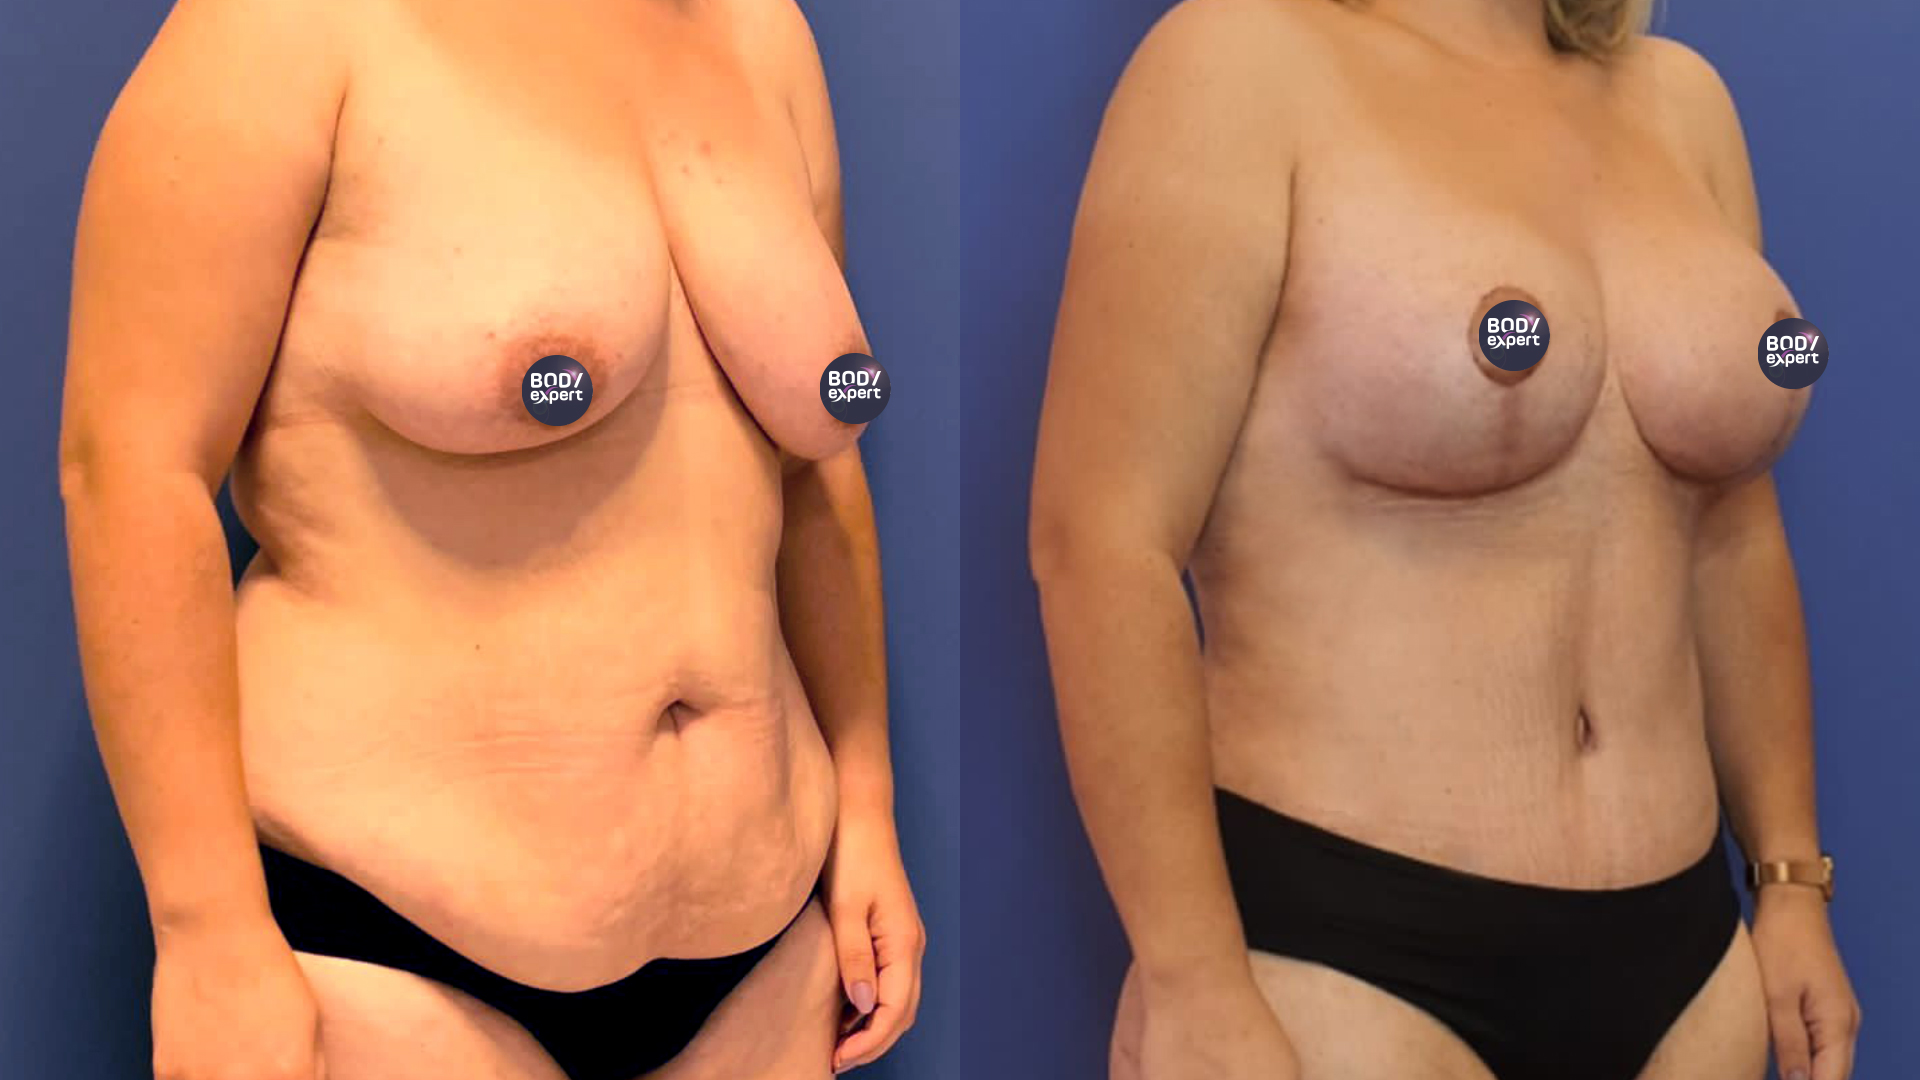 The results of a mastopexy combined with a tummy tuck